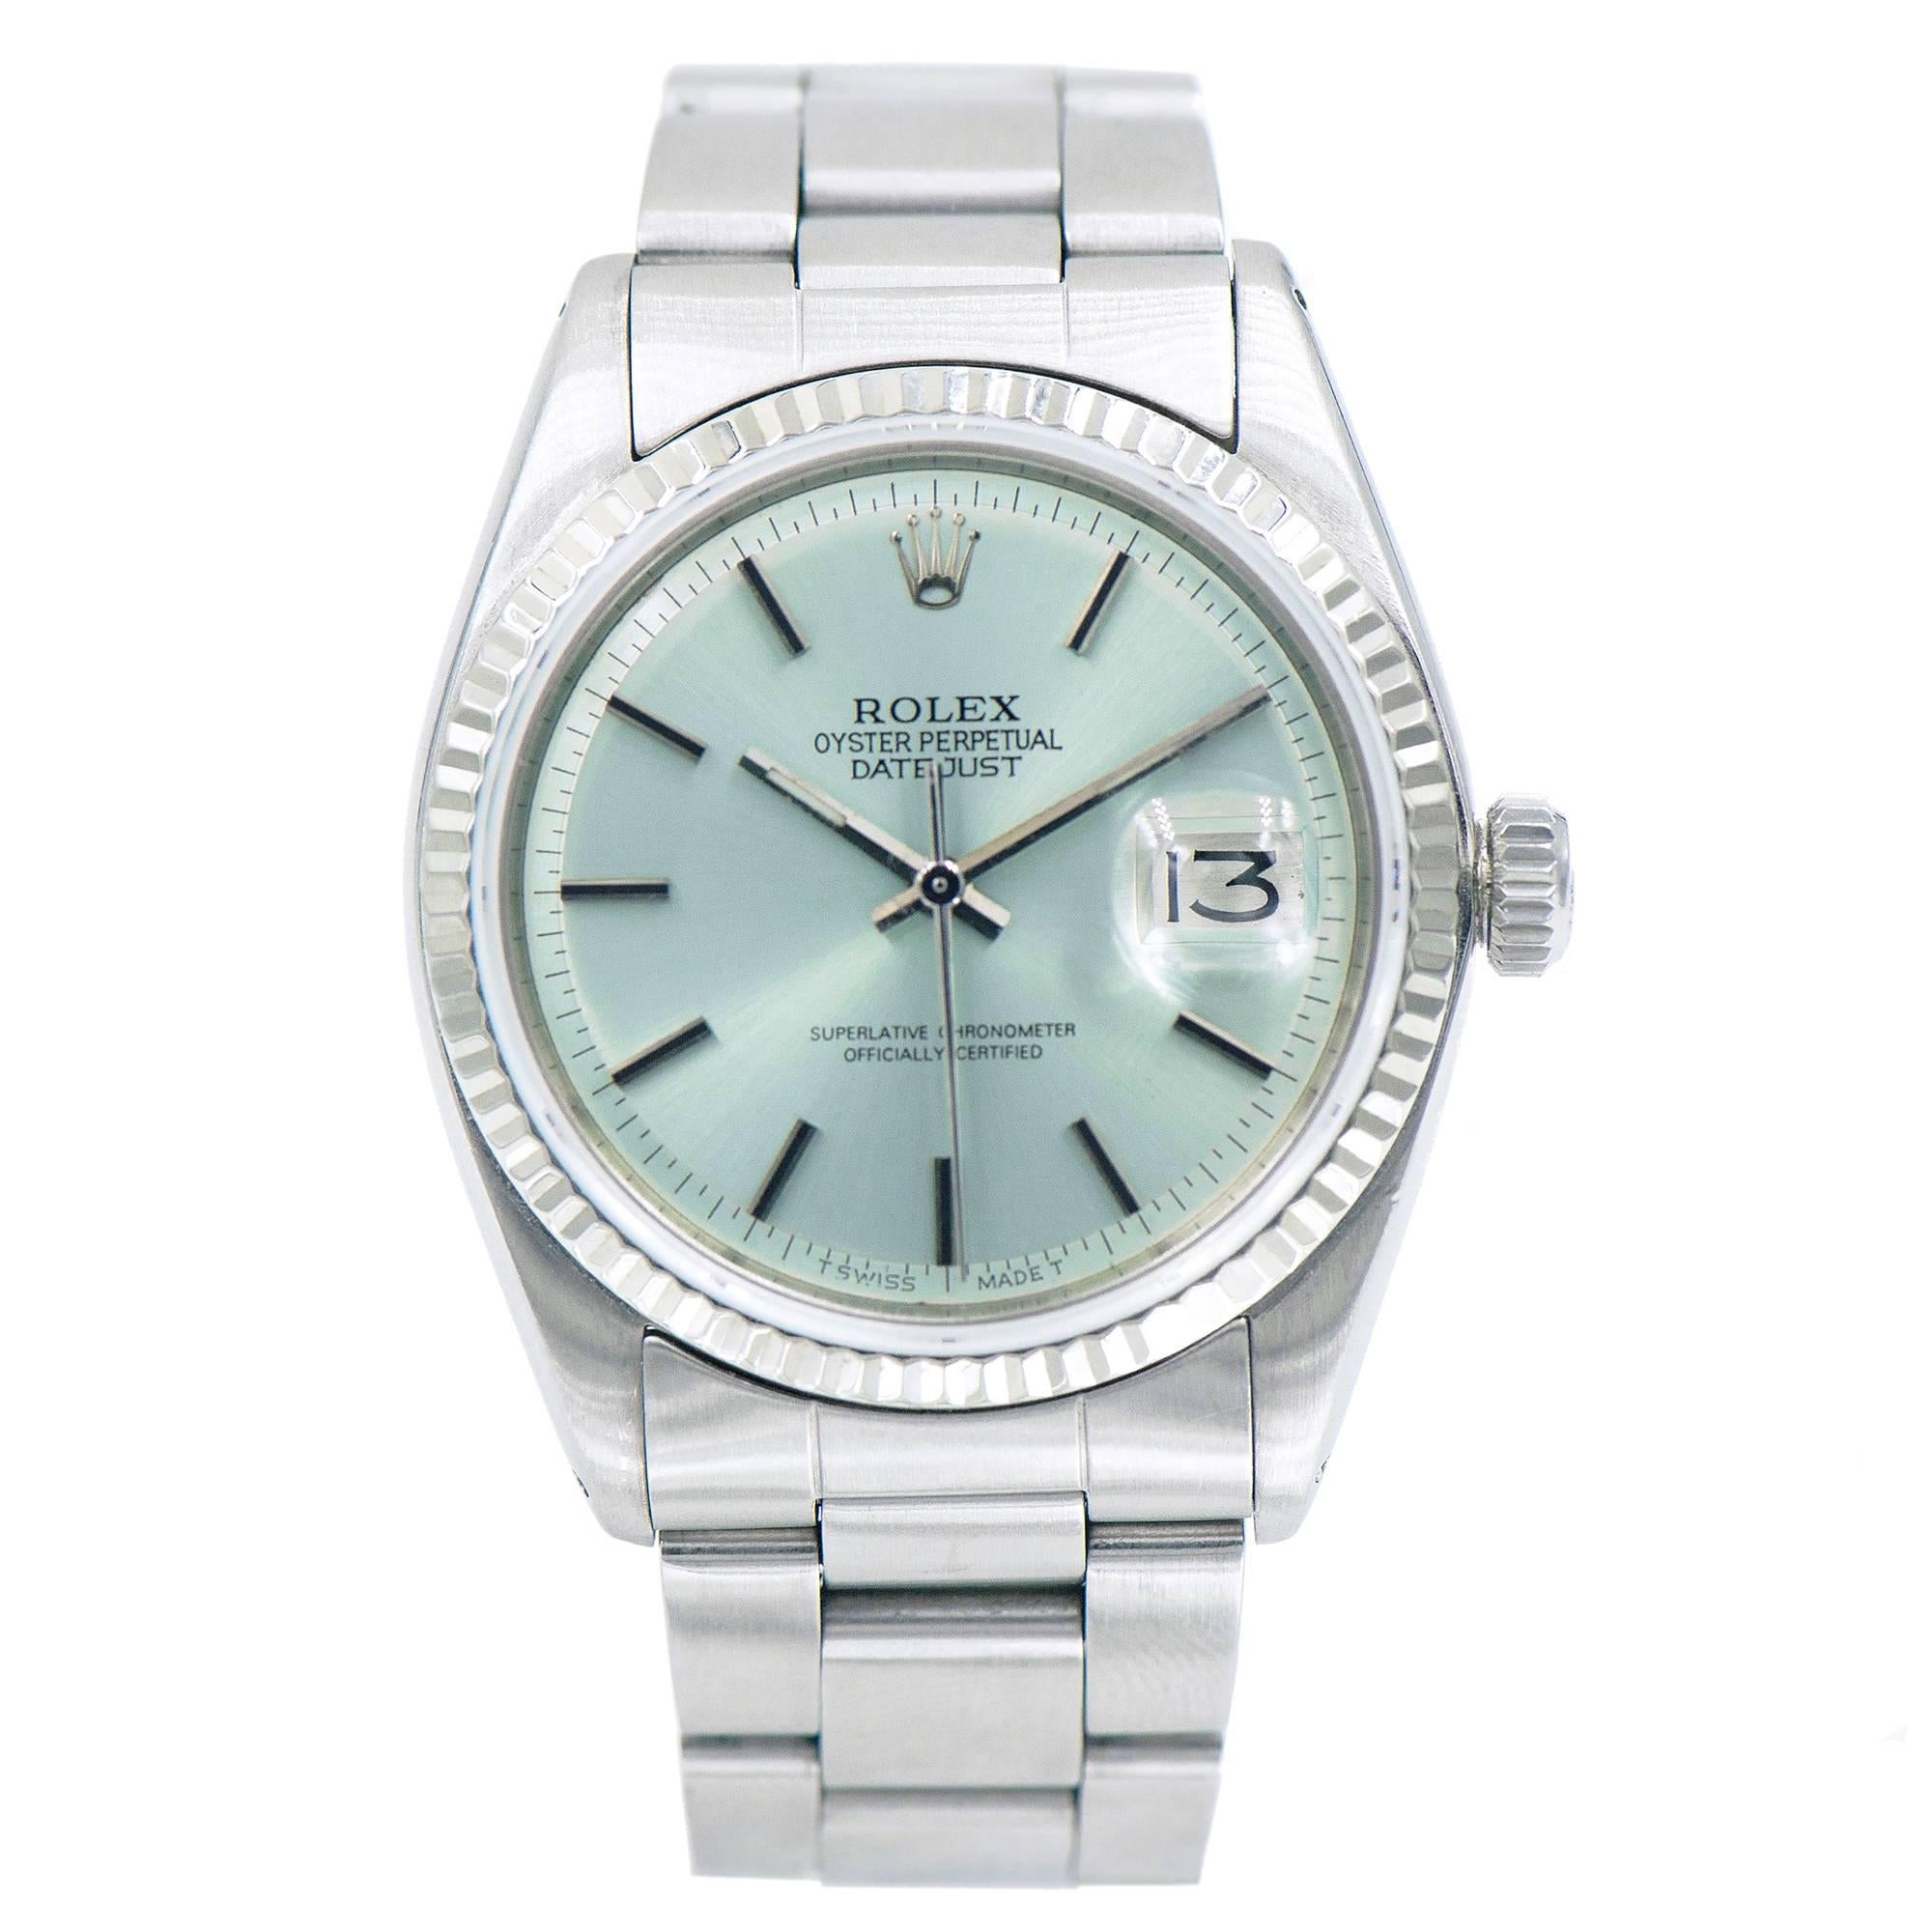 Rolex 1601 Oyster perpetual Datejust. Solid reliable movement Sapphire crystal. Blue custom colored ice blue dial.

Strap length: 6.75 inches – links may be available
Steel
105.6 grams
Length: 43mm
Width: 35mm
Band width at case: 20mm
Case